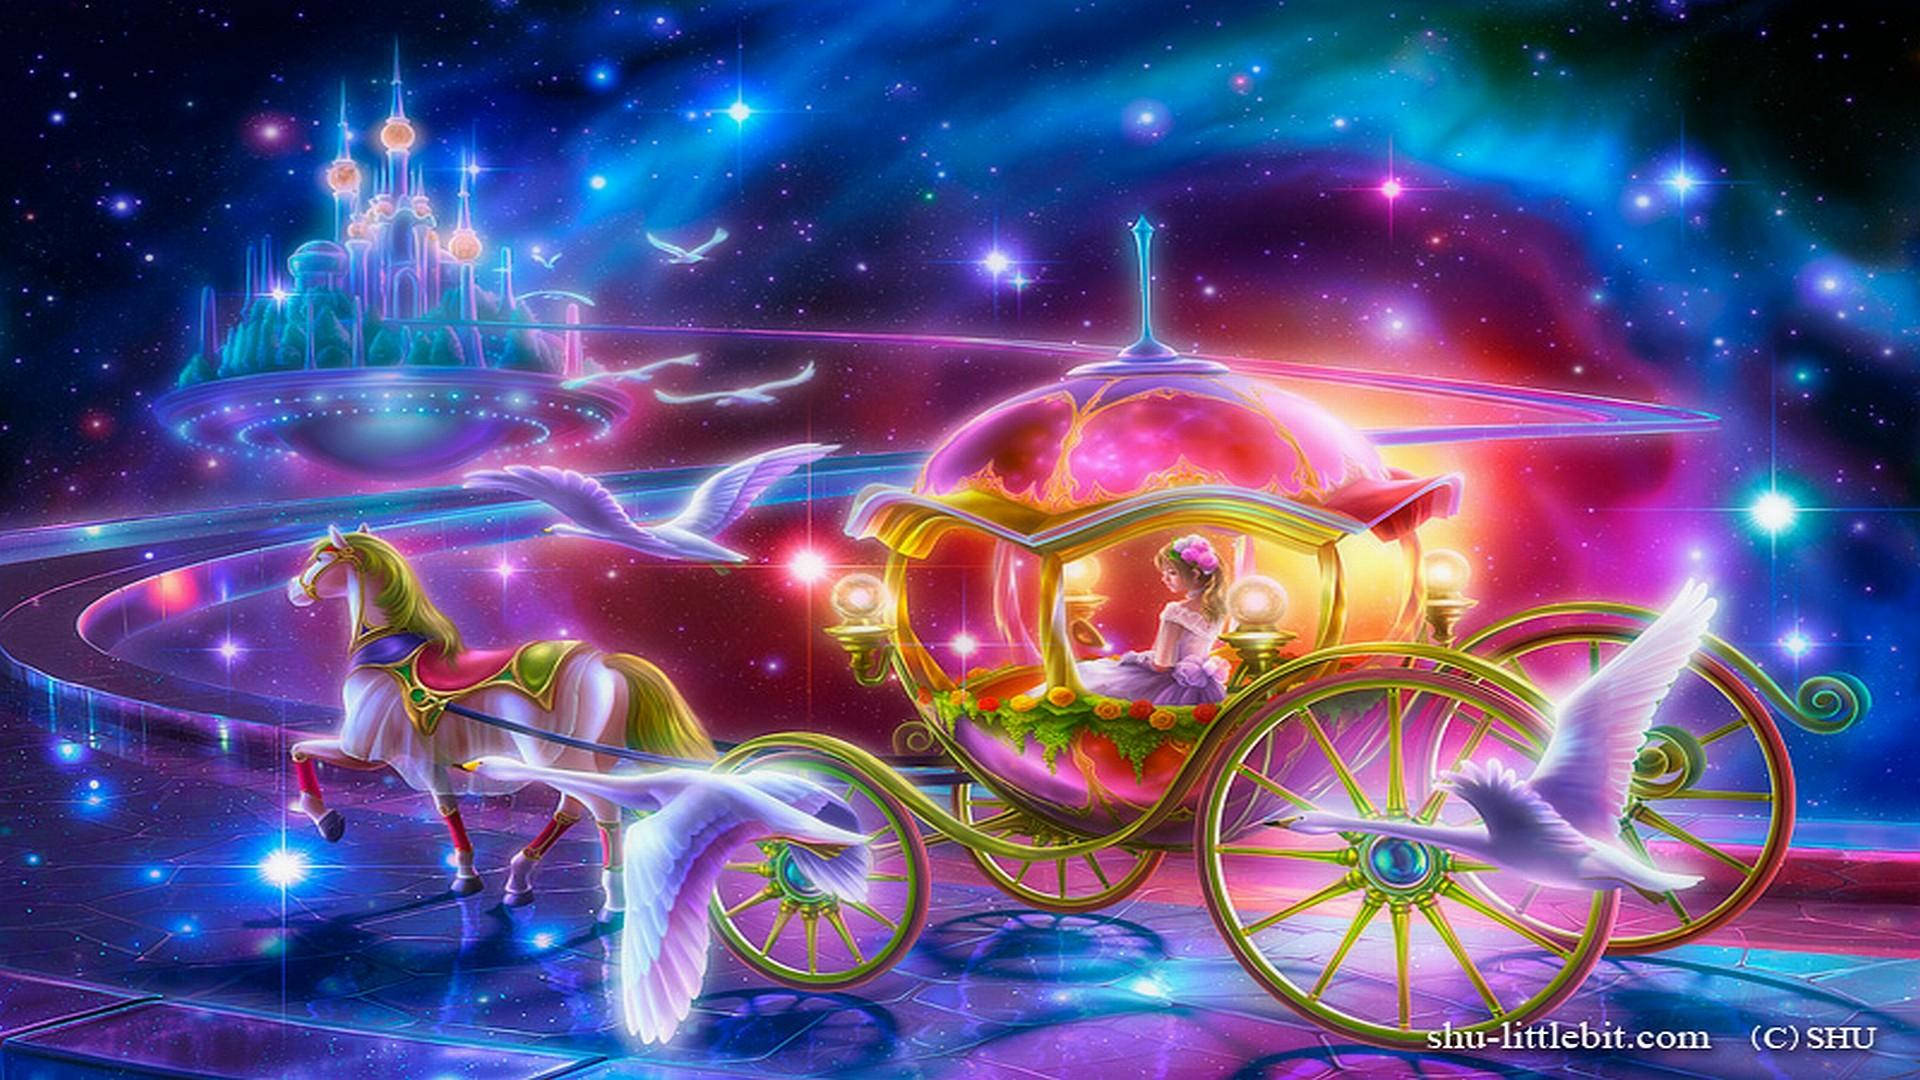 Awesome Cinderella's Coach Background